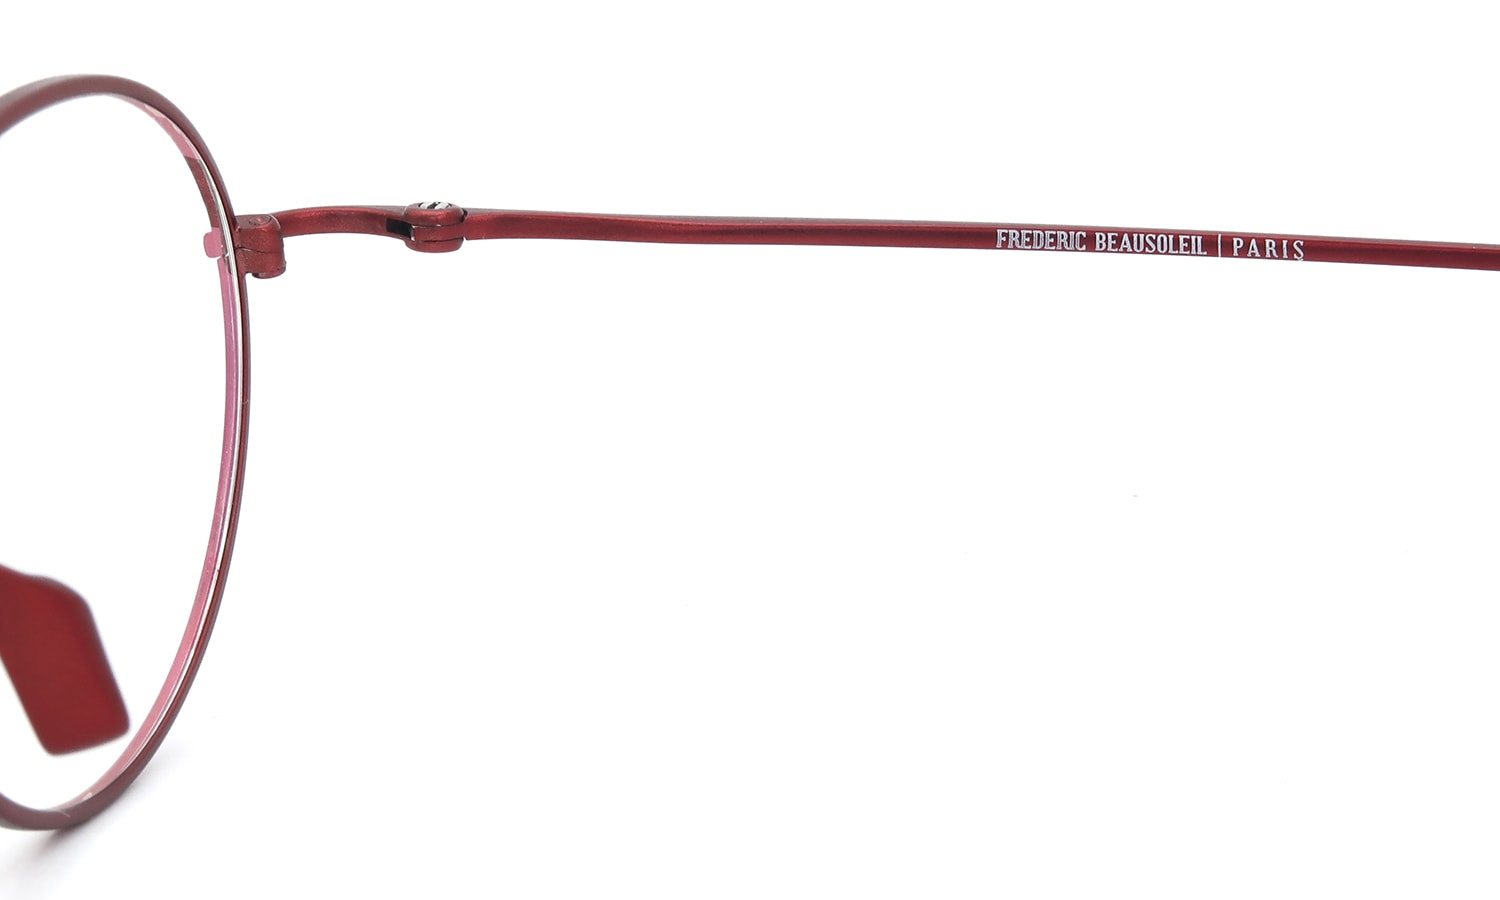 FREDERIC BEAUSOLEIL M711 RED